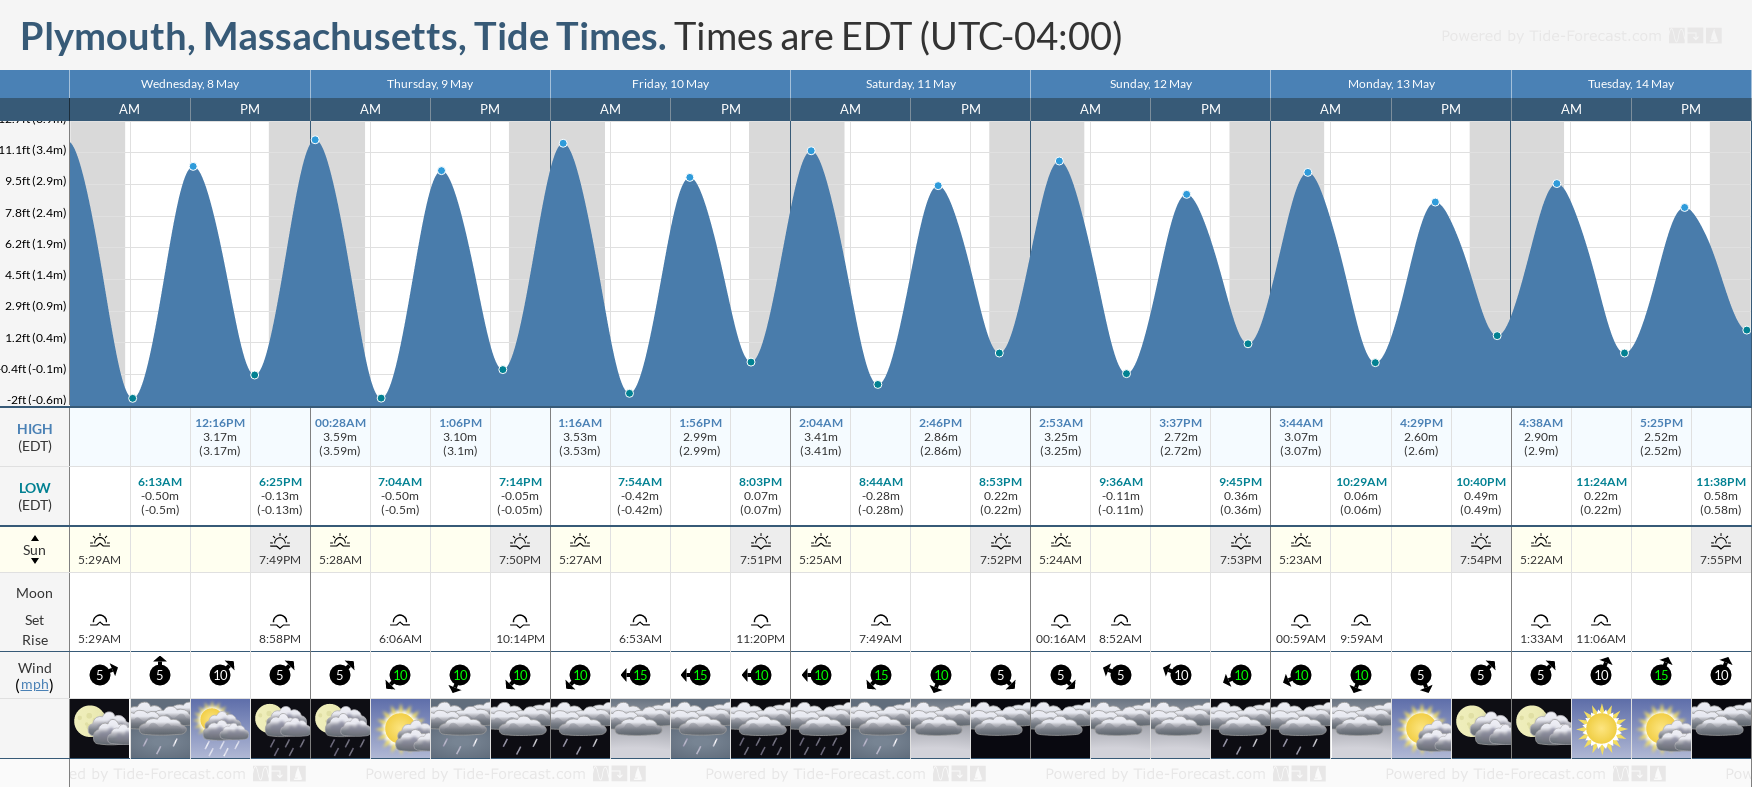 Plymouth, Massachusetts Tide Chart including high and low tide tide times for the next 7 days